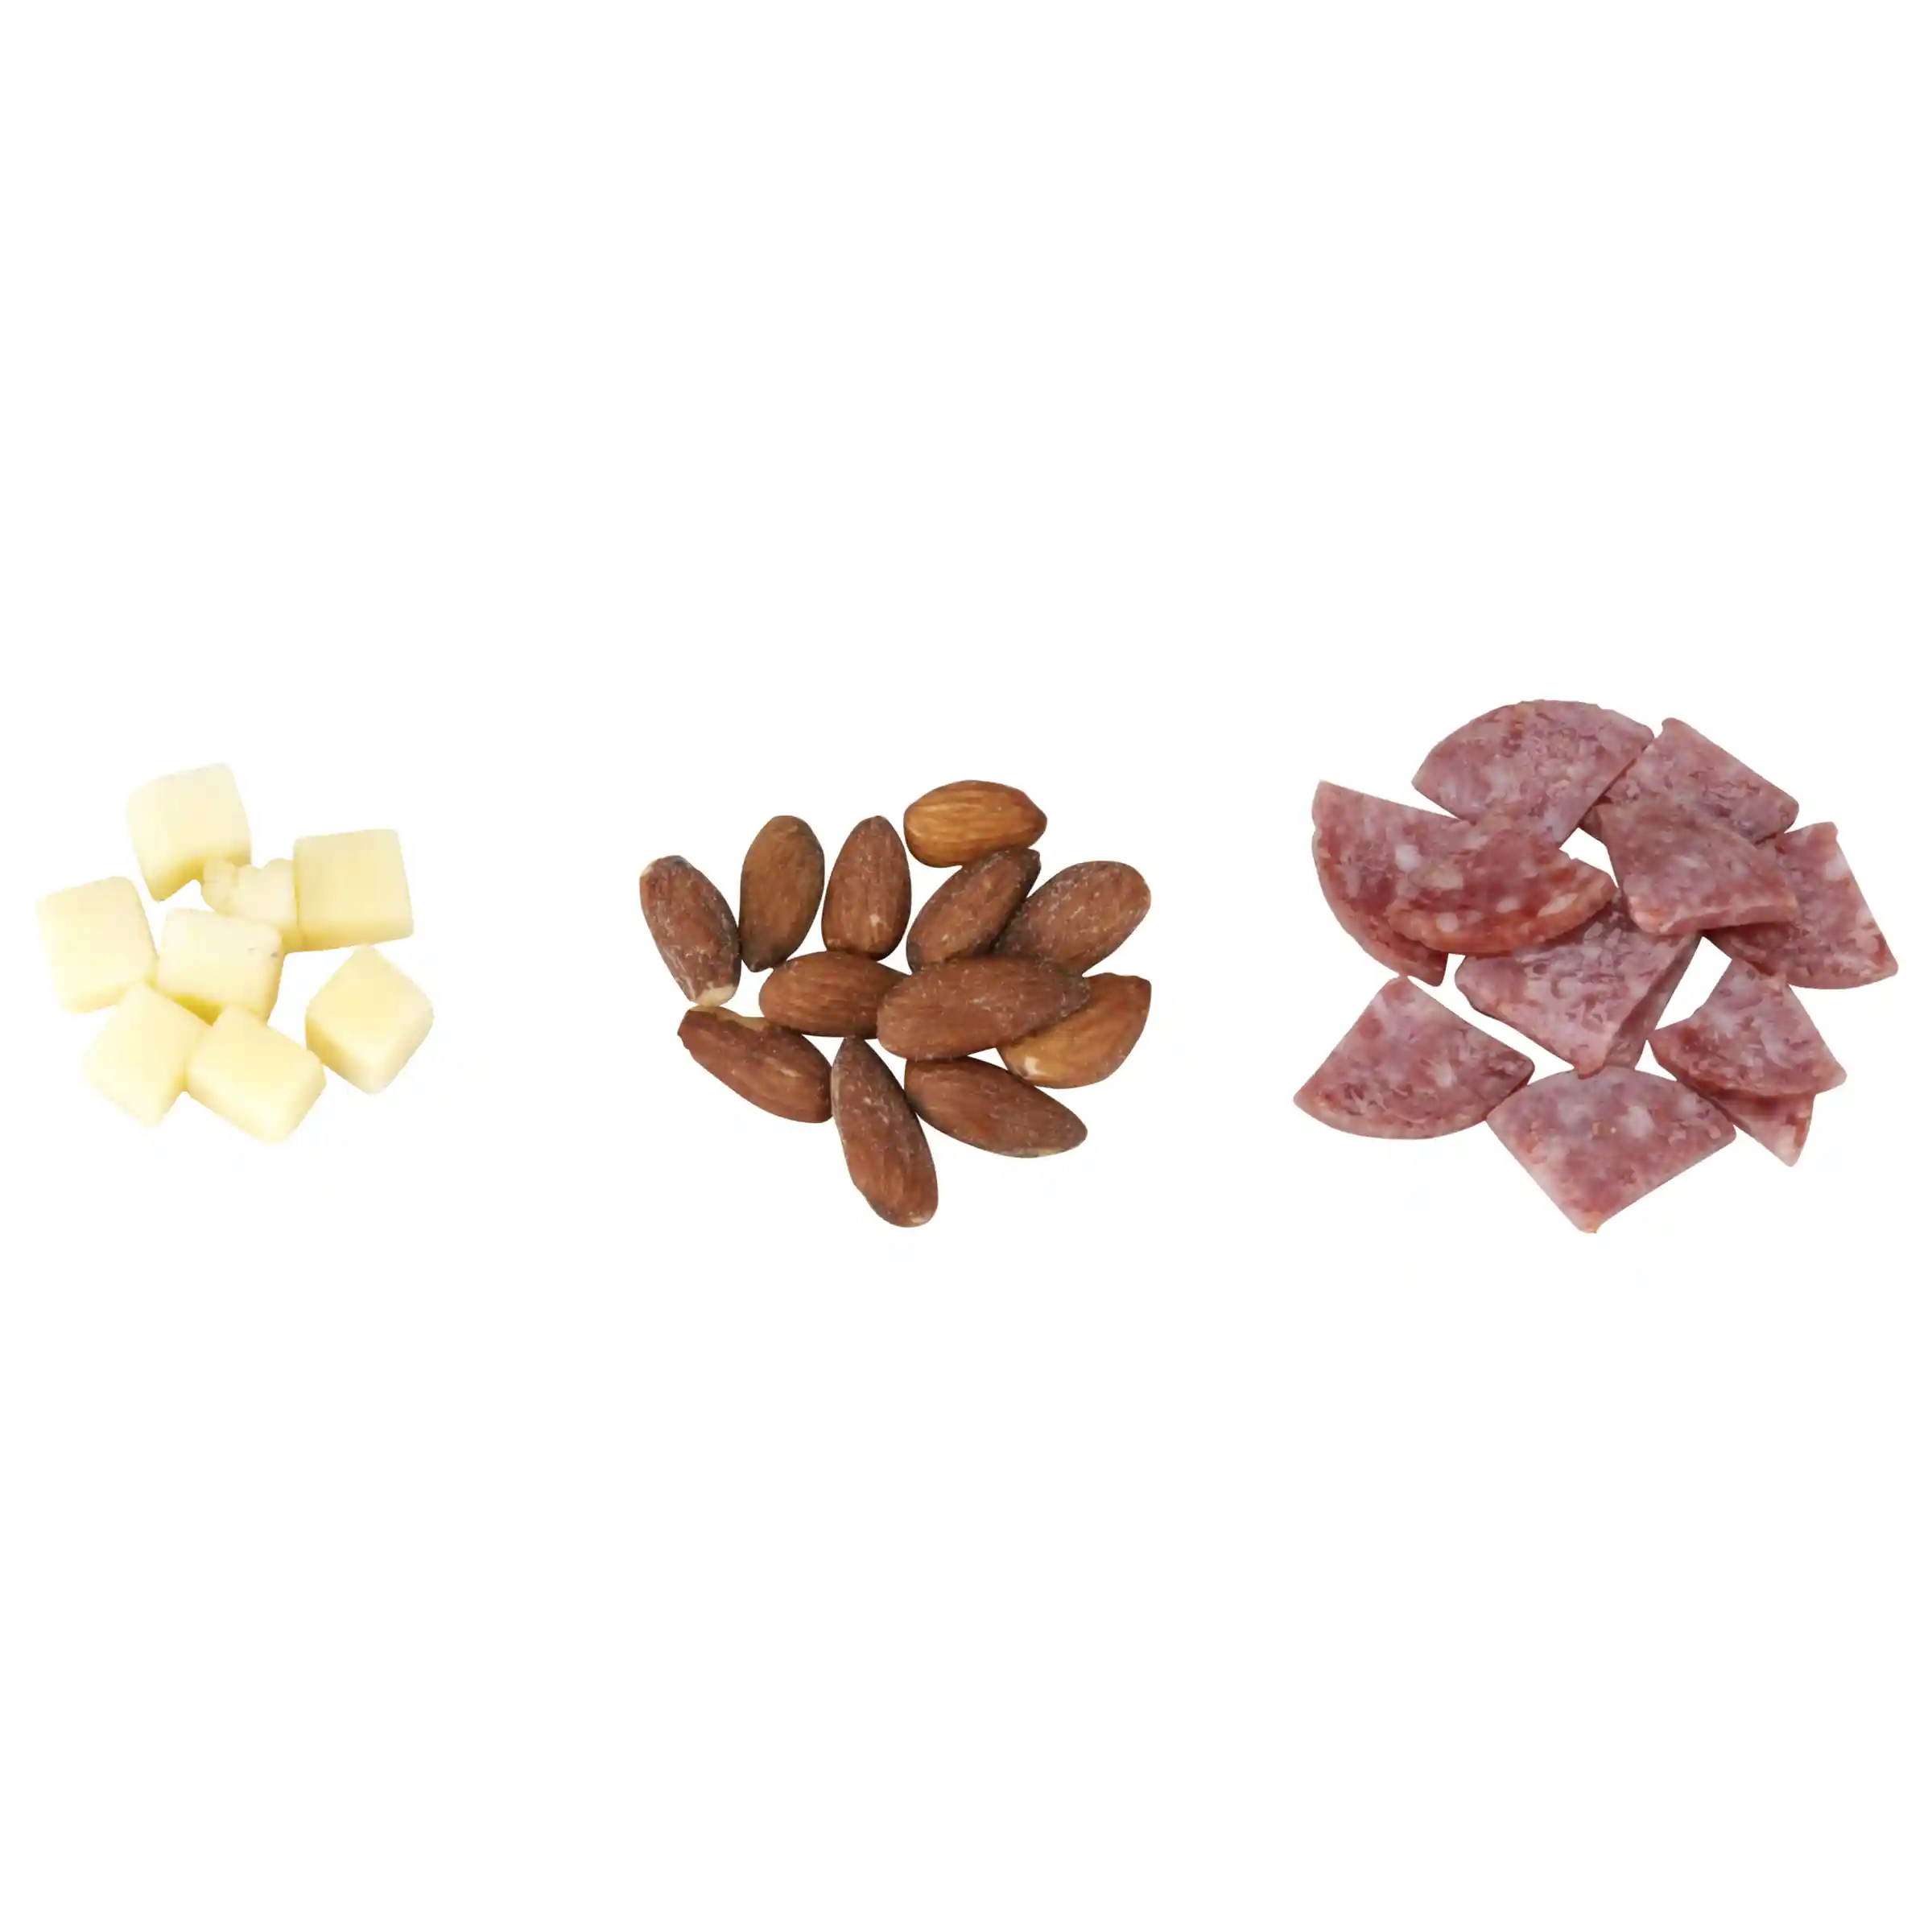 Hillshire Snacking Bistro Bites, Wine Infused Salami, White Cheddar Cheese, Salted Almonds, 2.8 oz_image_01